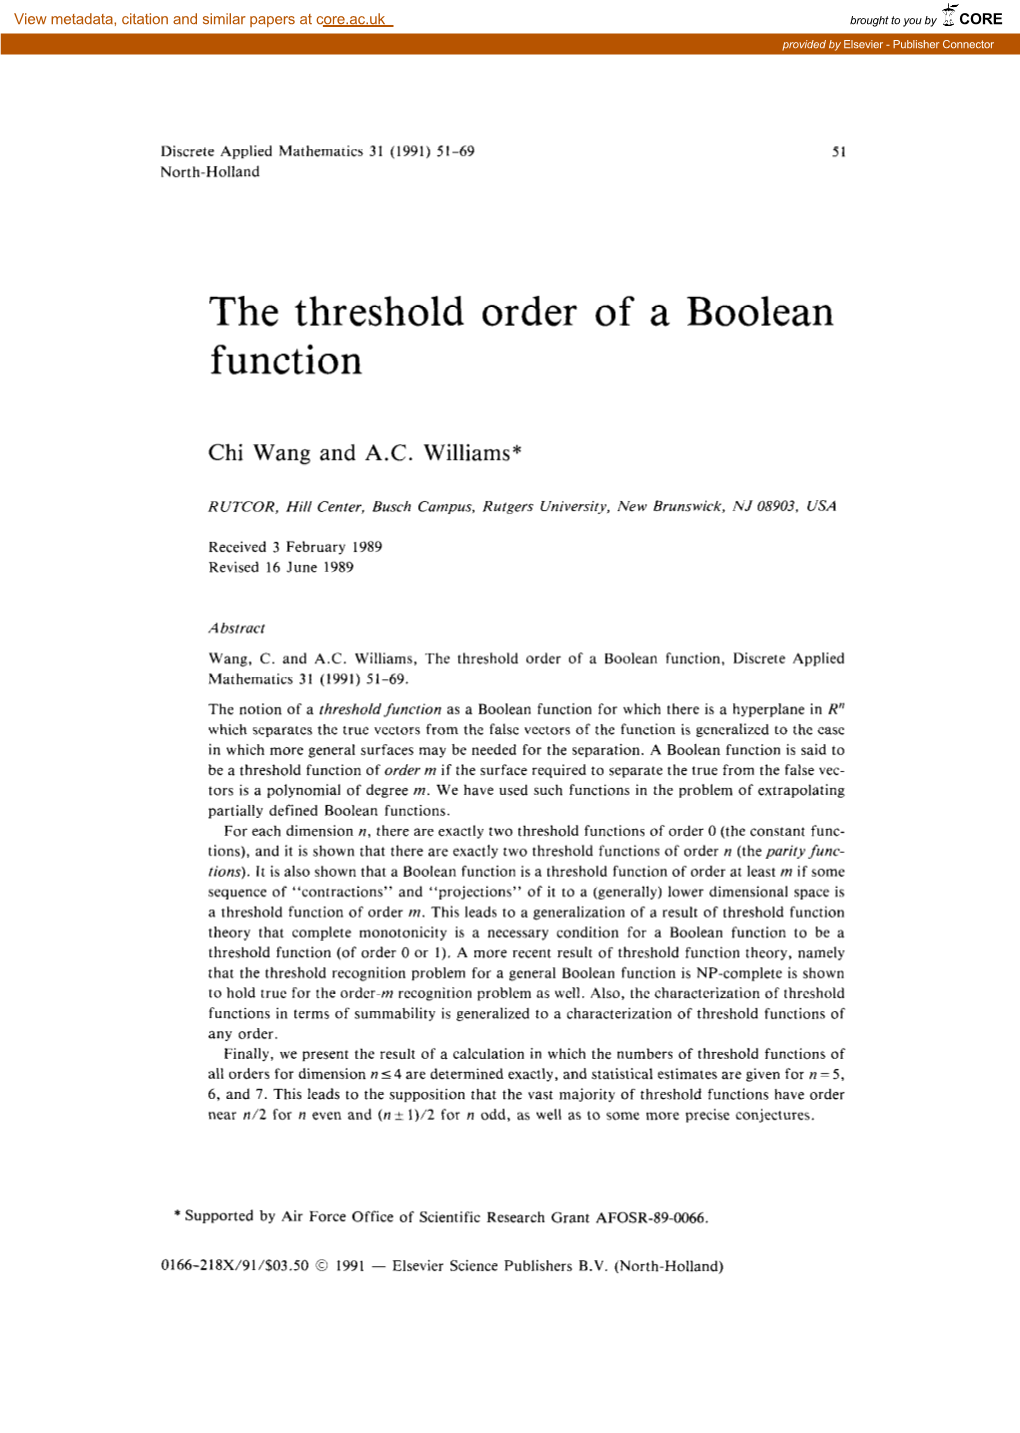 The Threshold Order of a Boolean Function